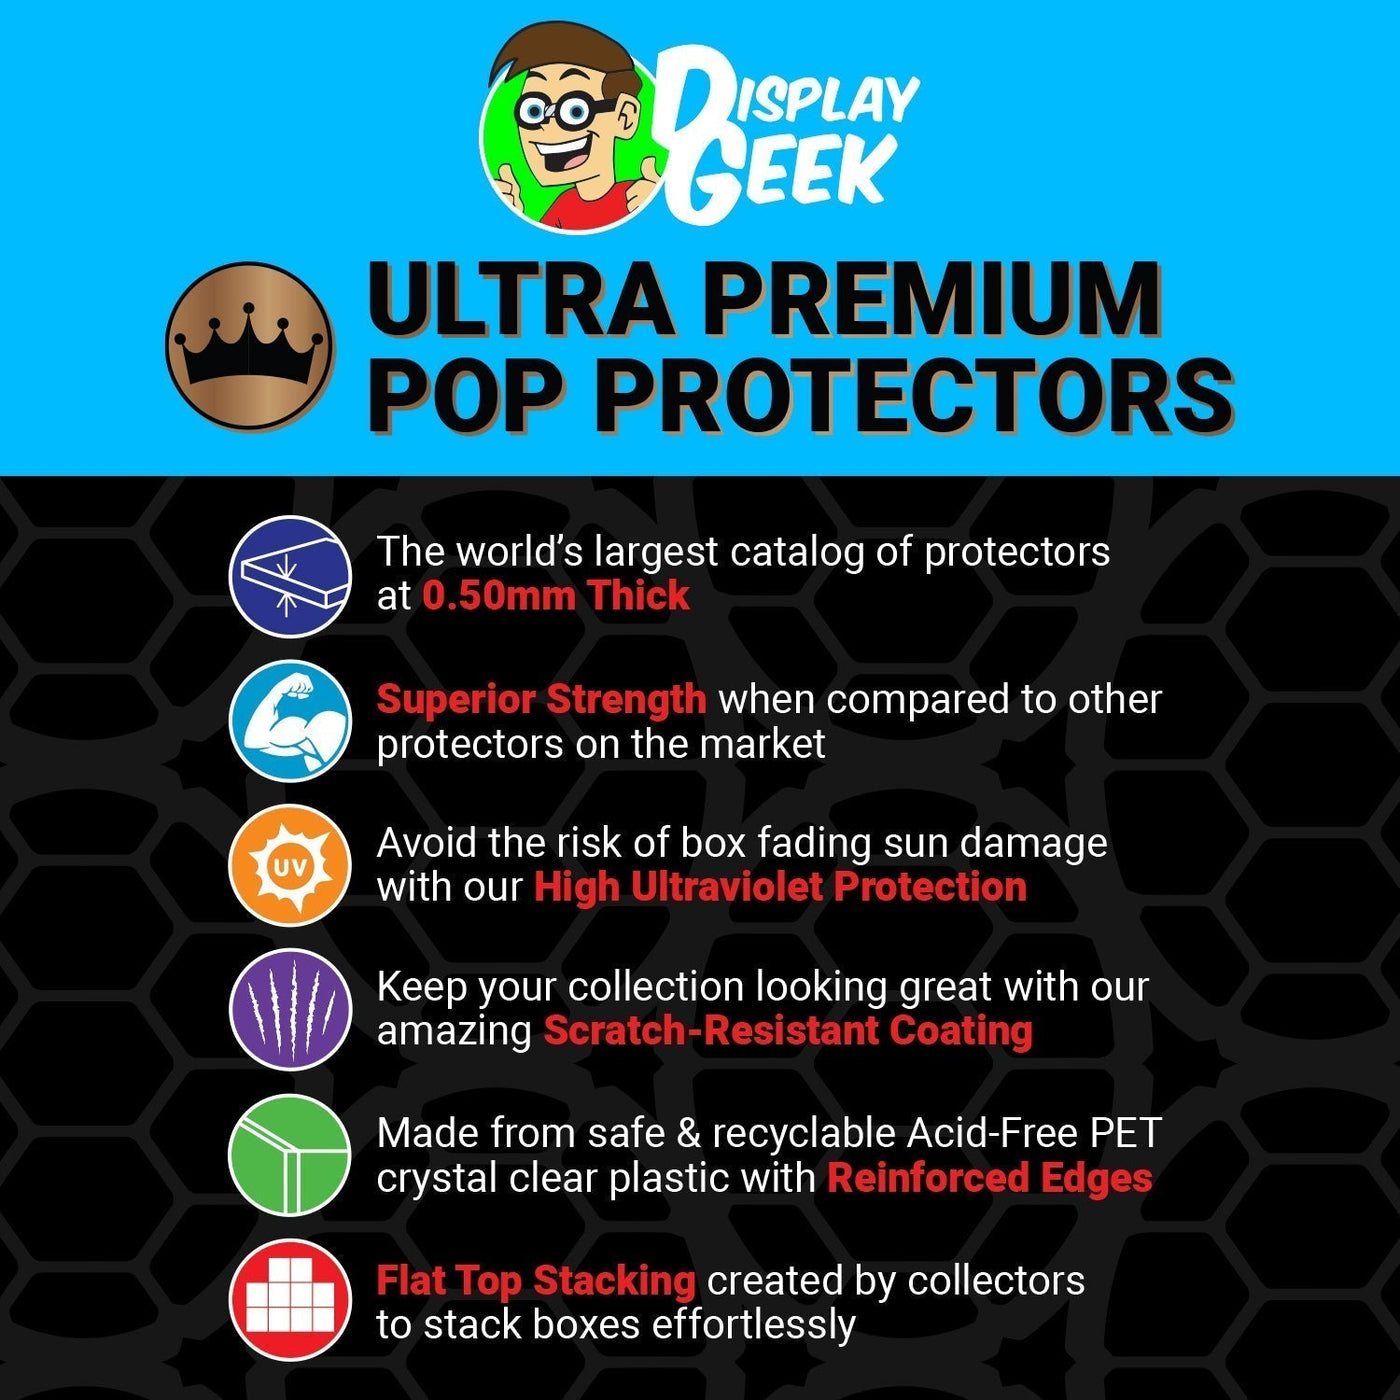 Pop Protector for Aquaman FunkO's Cereal Box on The Protector Guide App by Display Geek